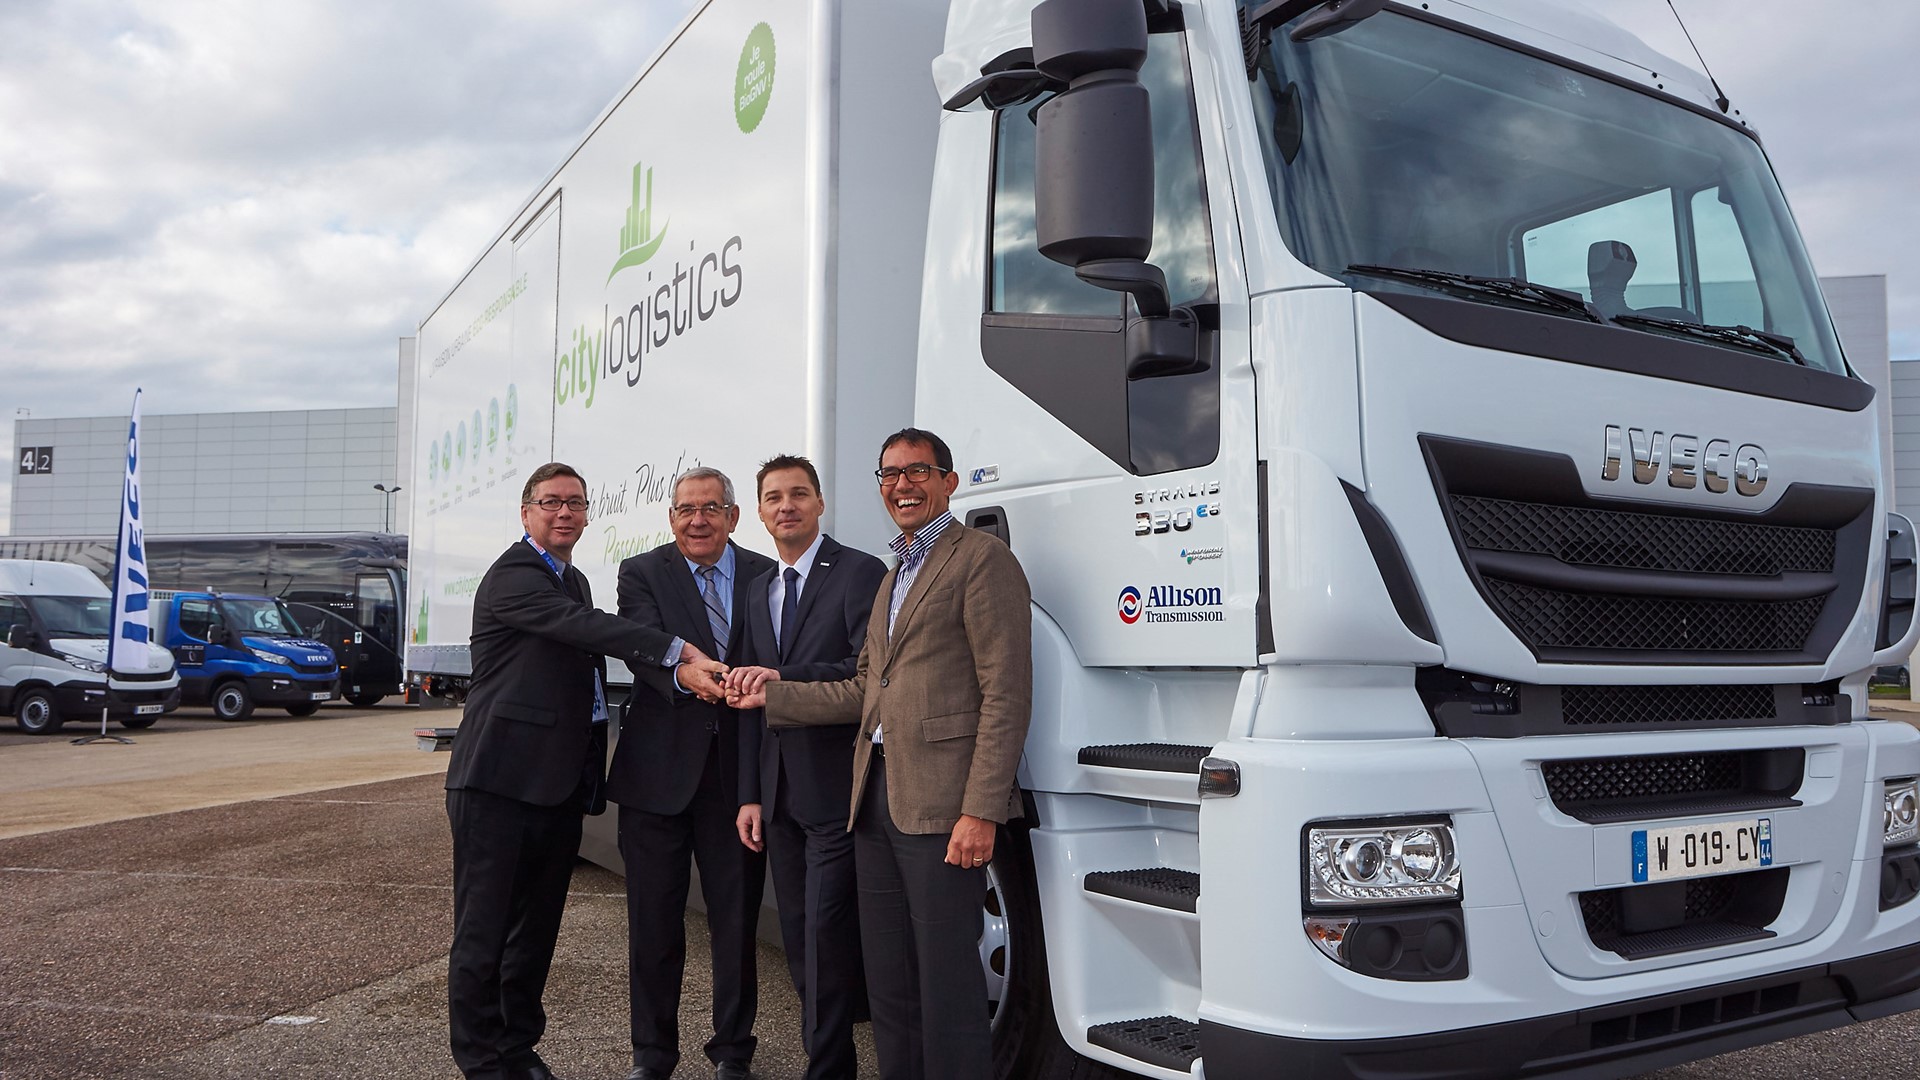 Representatives from Iveco and CityLogistics with the 1,000th natural gas vehicle sold by Iveco in France